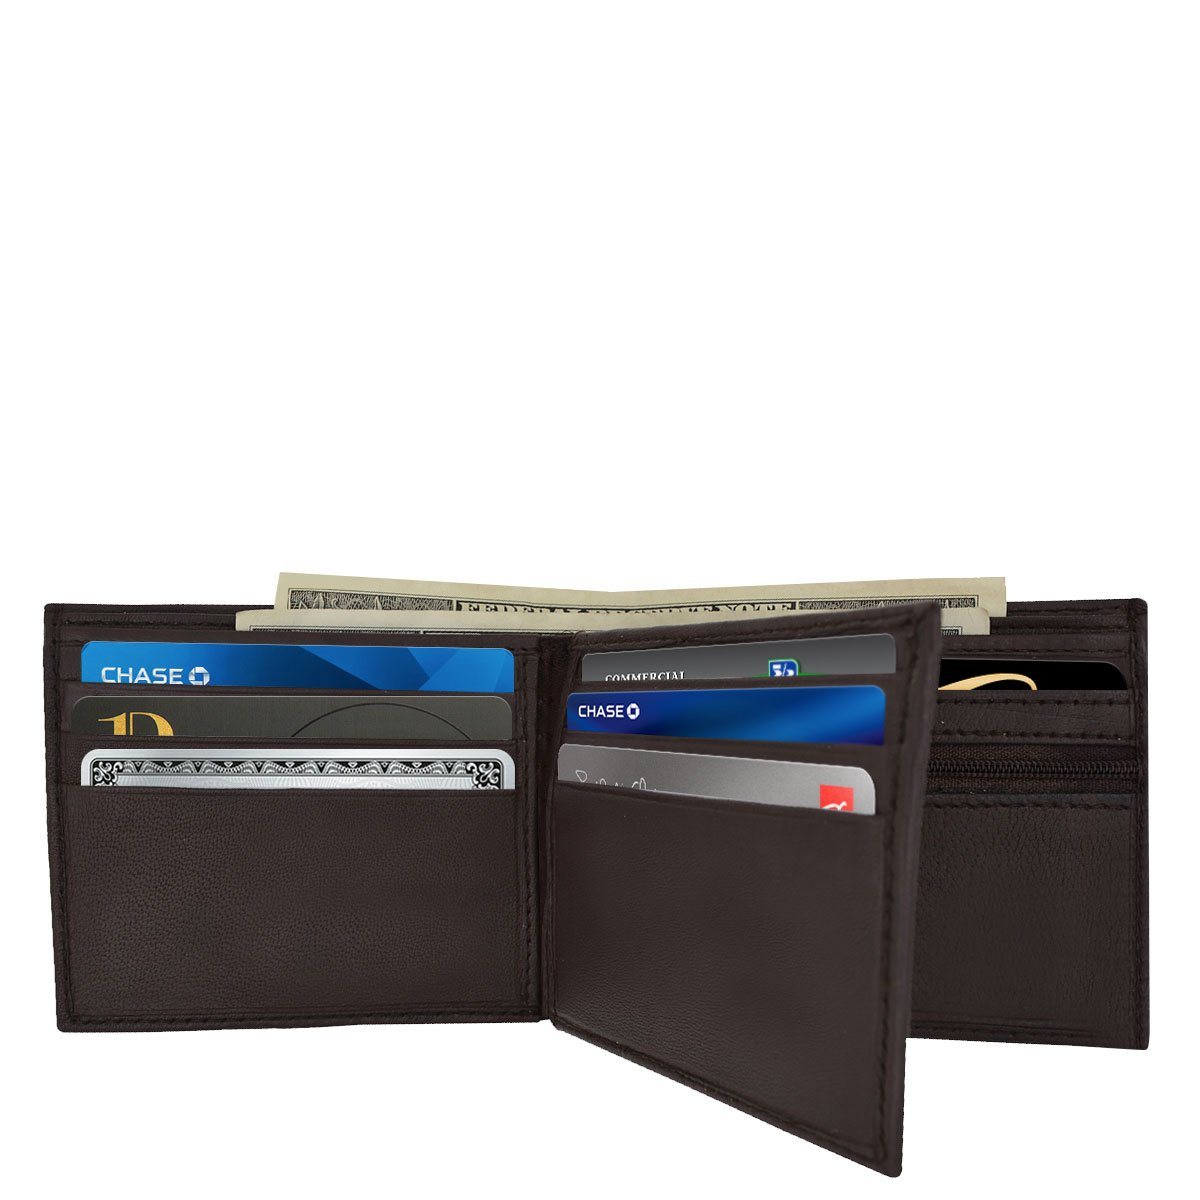 Men's ID Smooth Leather Bifold Wallet